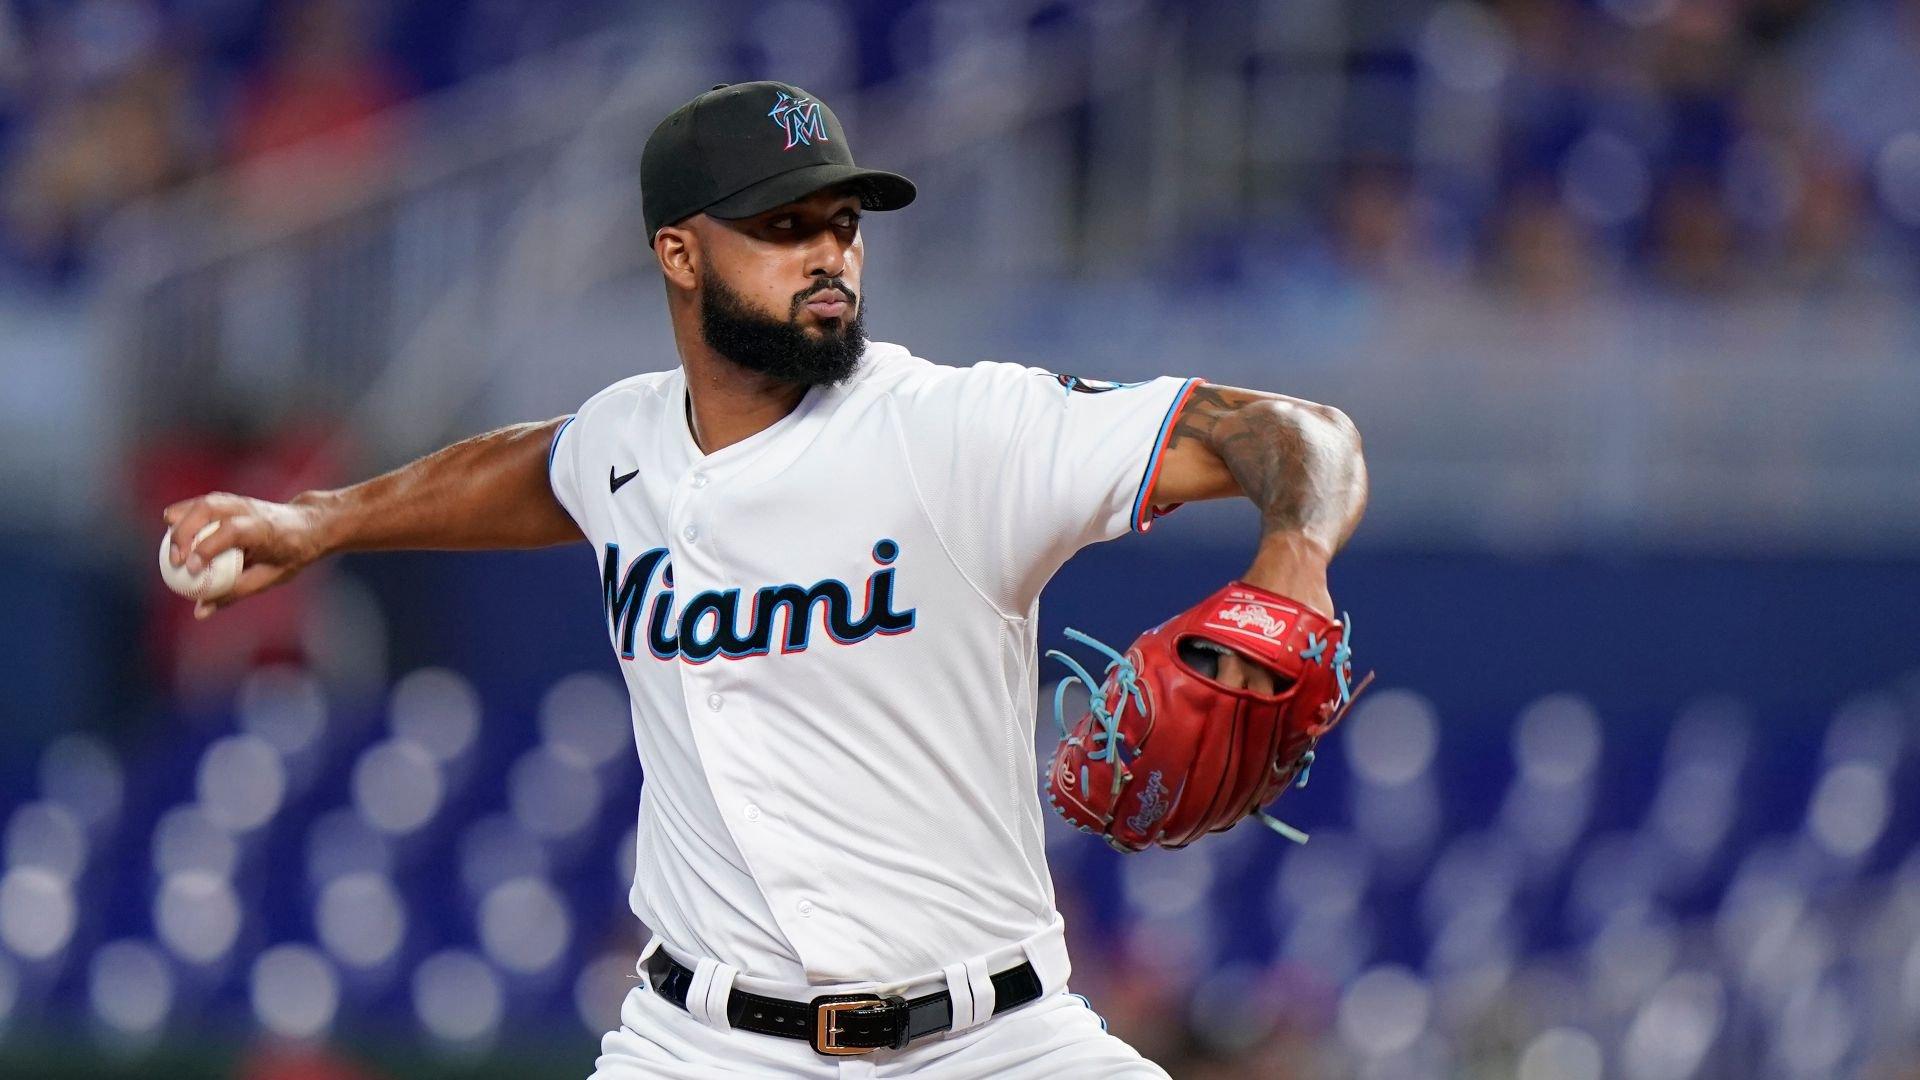 Padres vs. Marlins (August 15): Will NL Cy Young favorite Alcantara shut down San Diego?